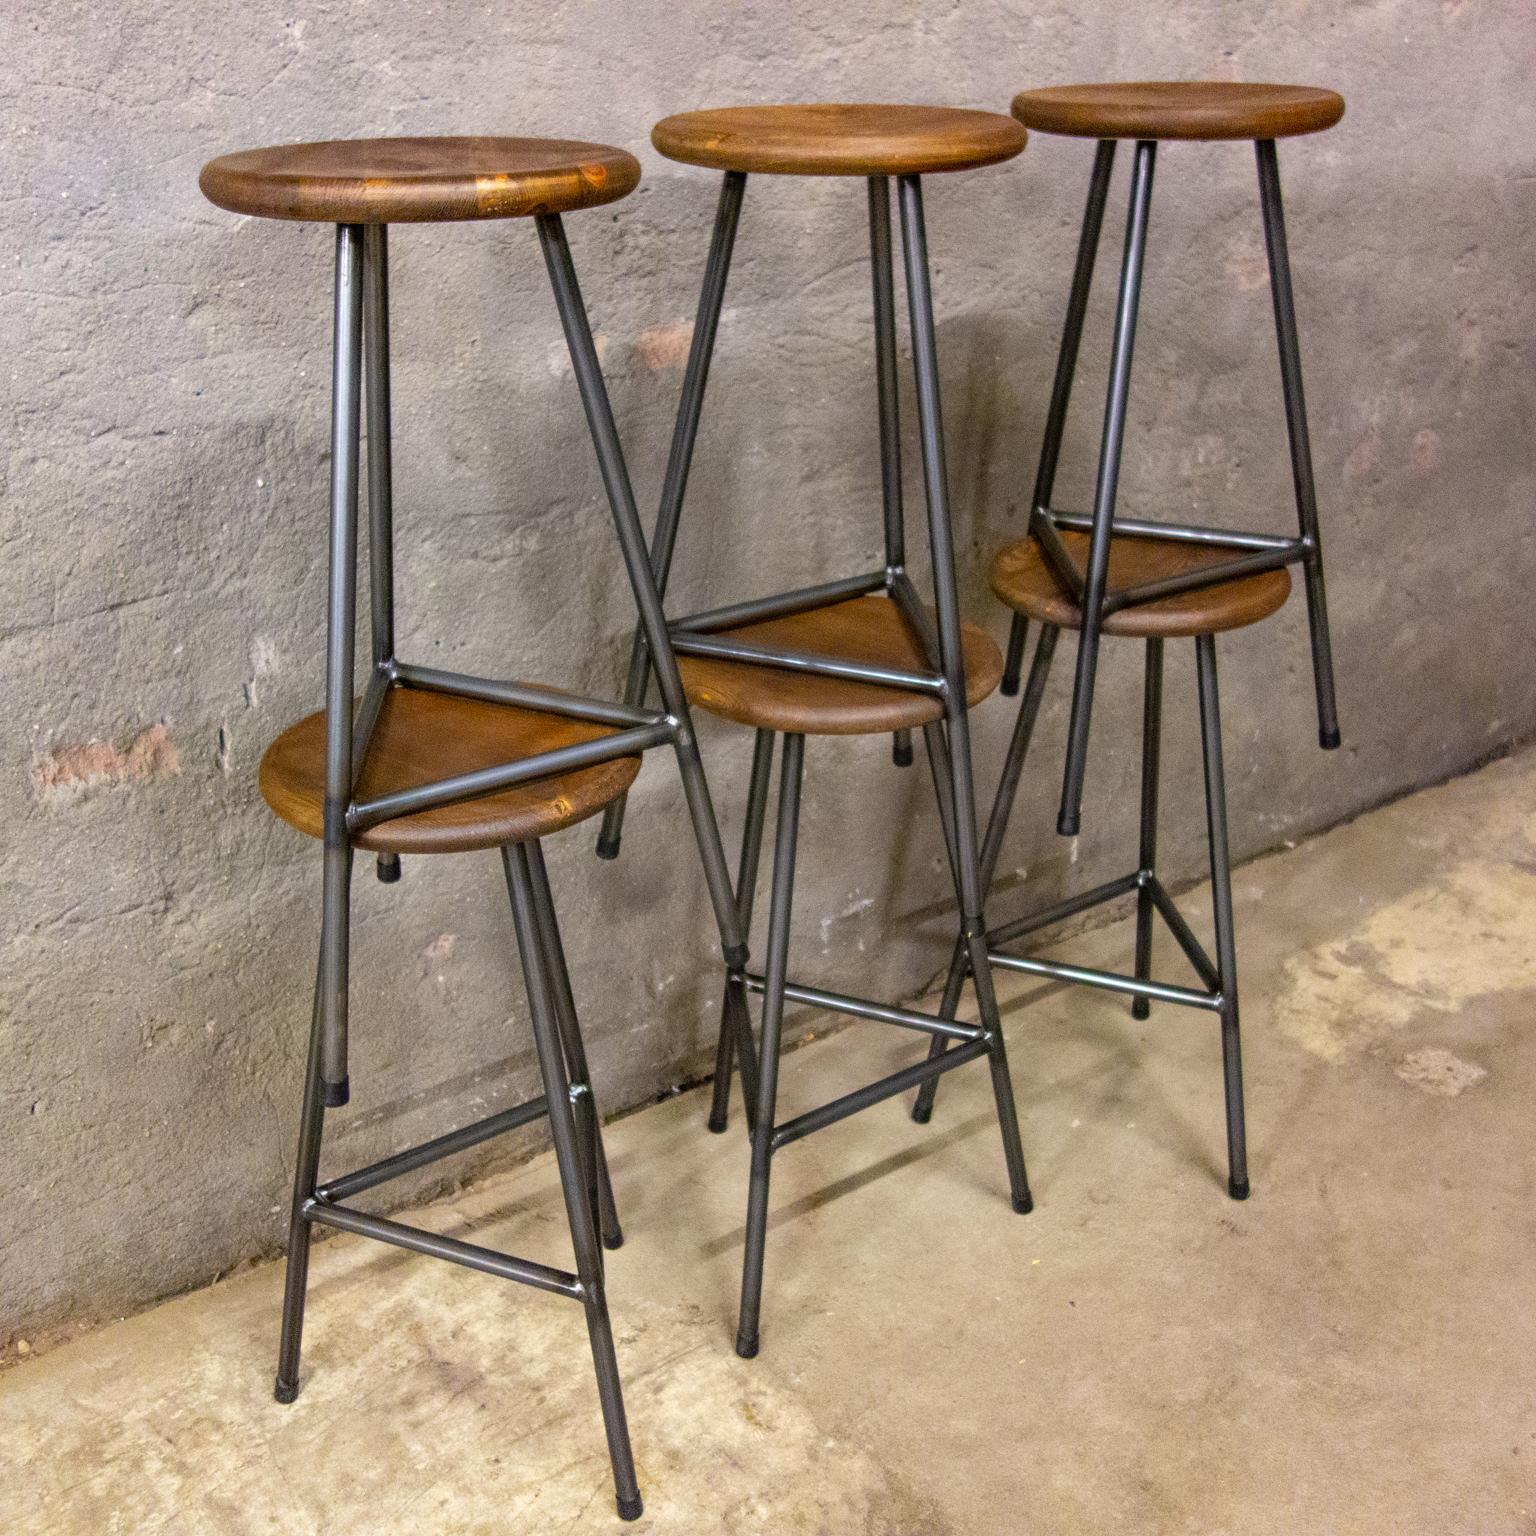 Hand-Carved Handcrafted Industrial Bar Stools For Sale